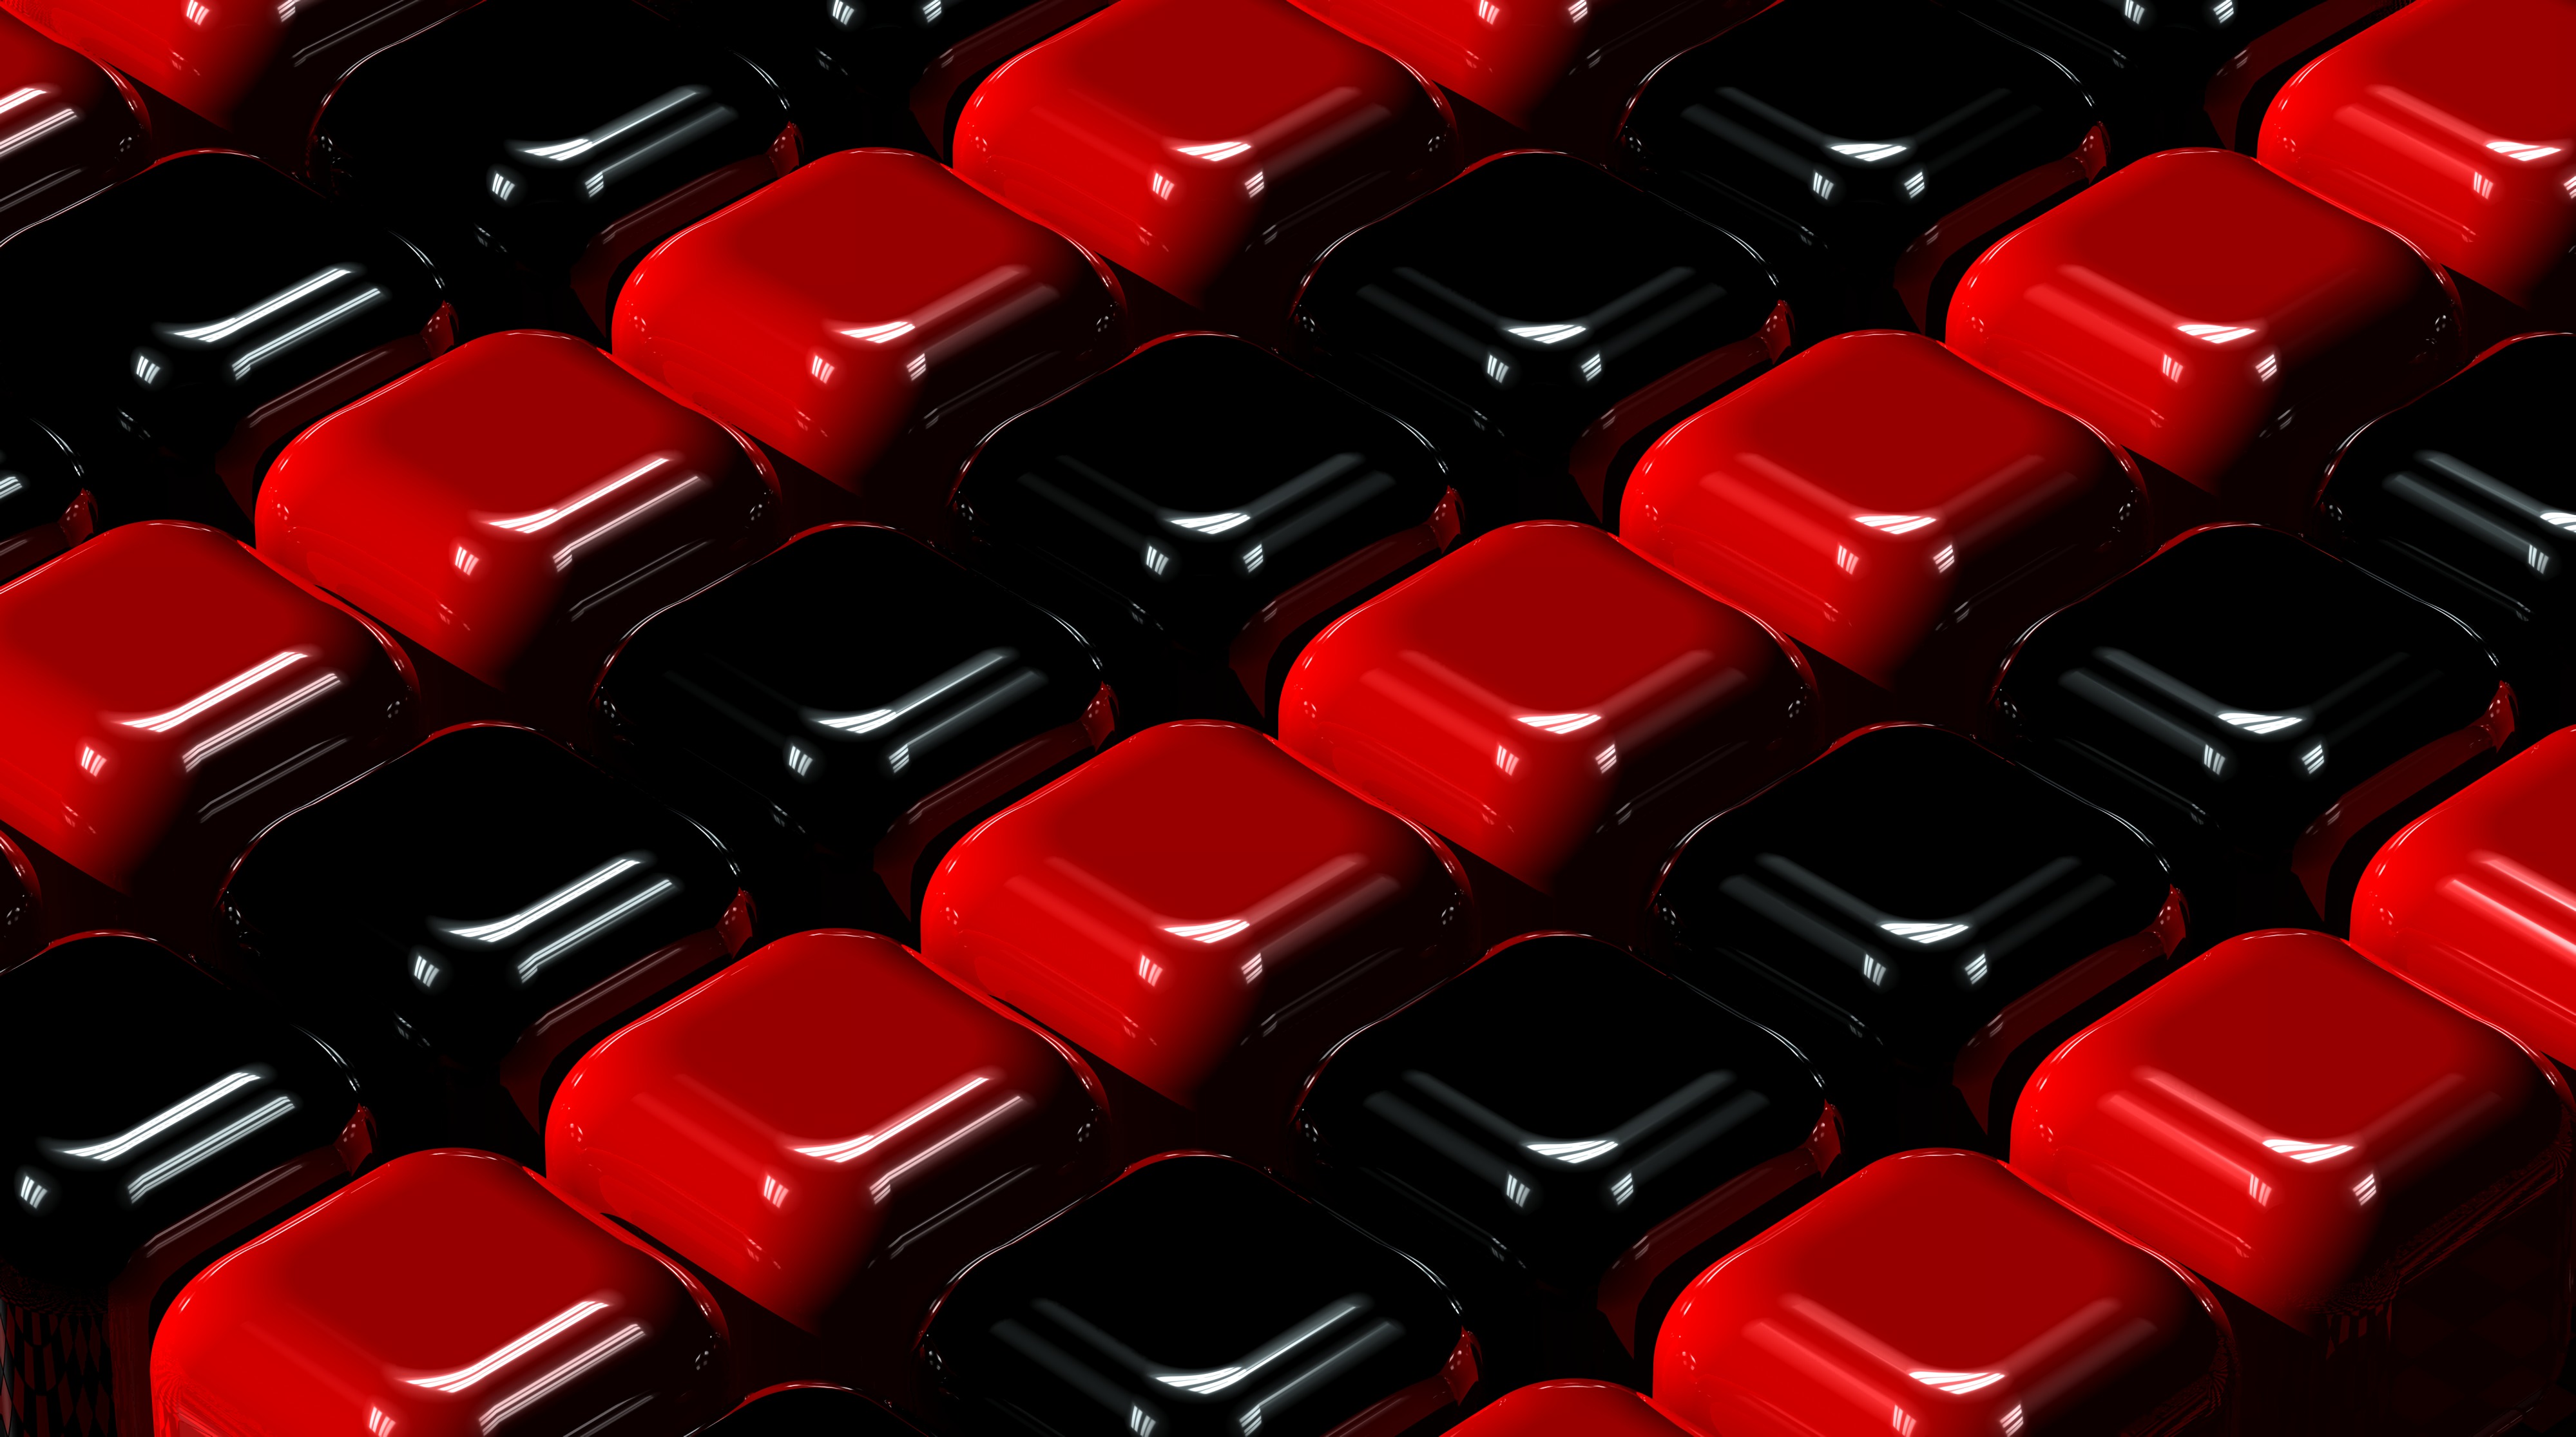 123060 free wallpaper 2160x3840 for phone, download images cuba, red, black, 3d 2160x3840 for mobile